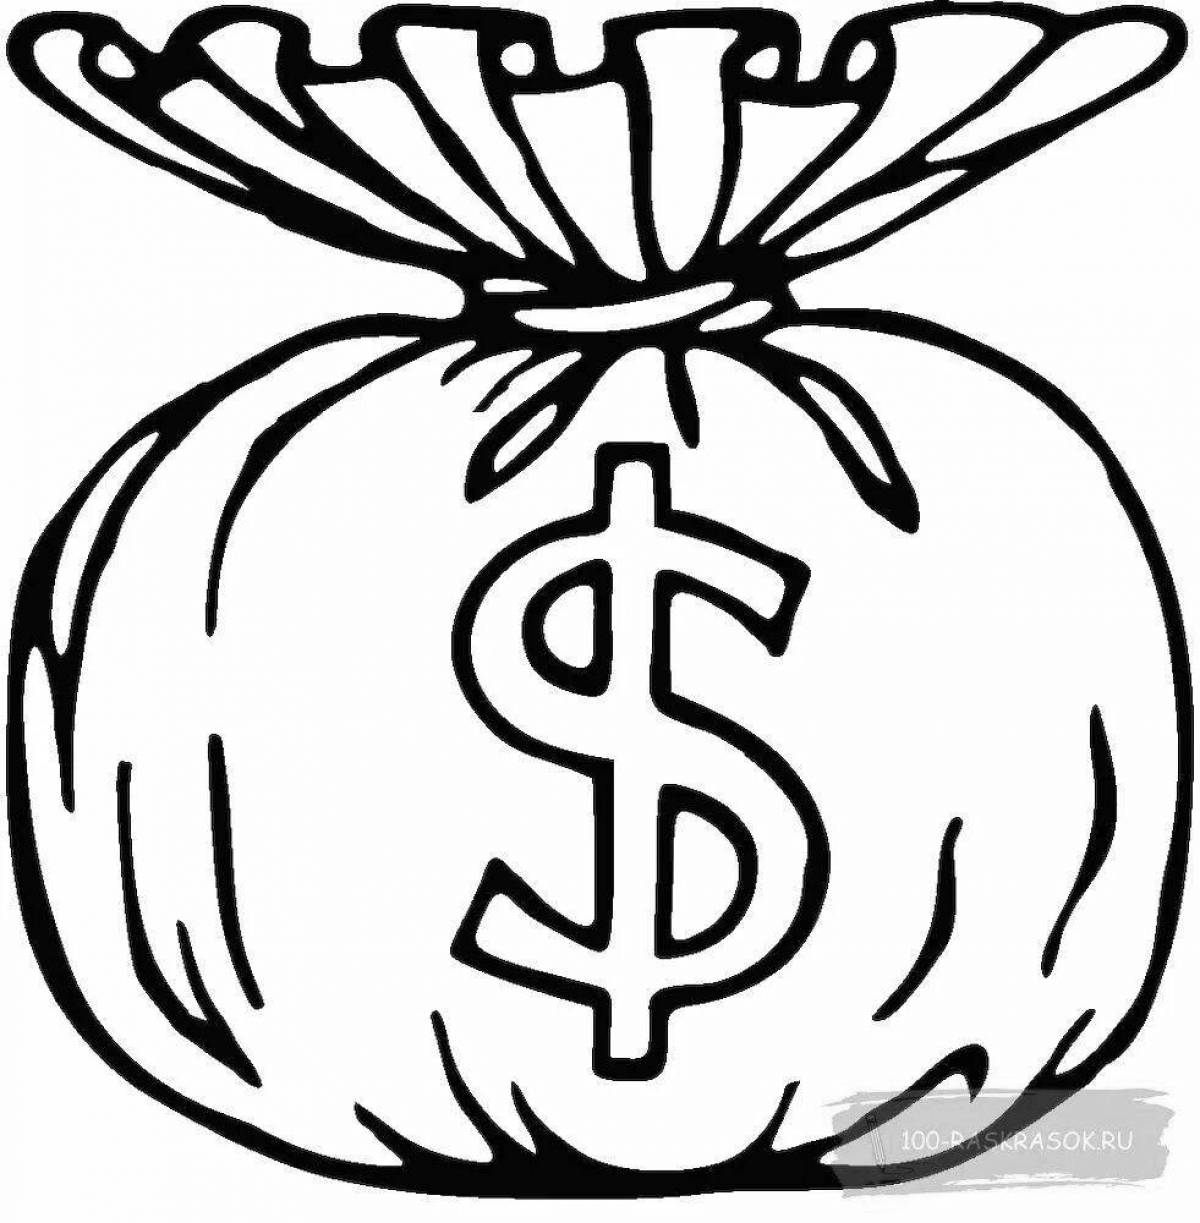 Coloring page gentle money-dollars